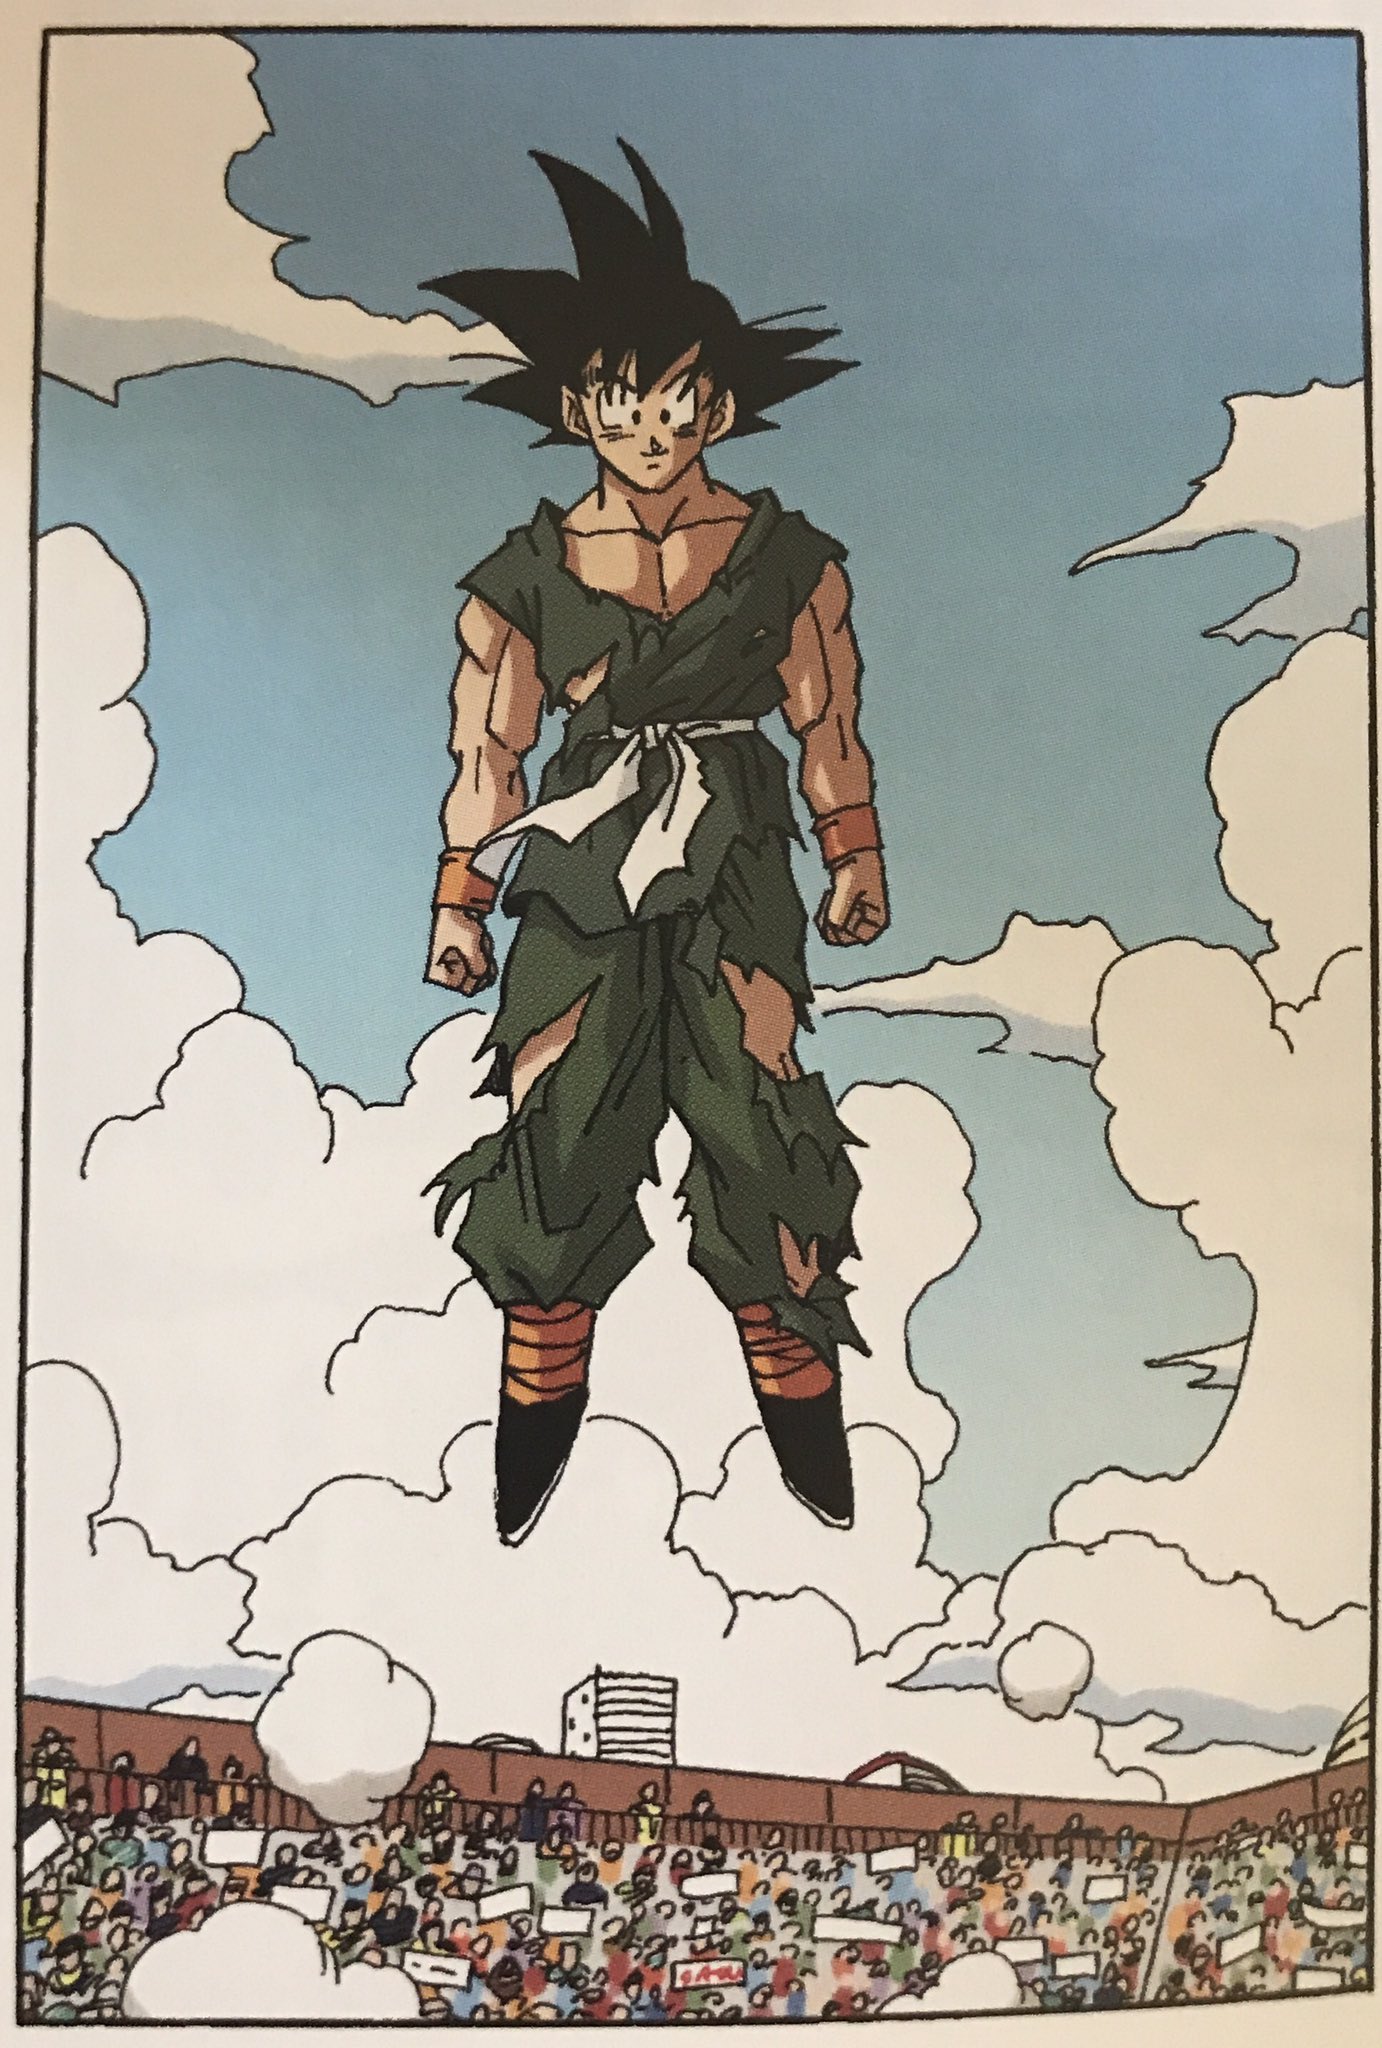 Todd Blankenship on X: Uub's inexperience with the larger world mirrors  Goku's at the start of the series. Ubu=inexperienced/innocent in  Japanese, by the way  / X